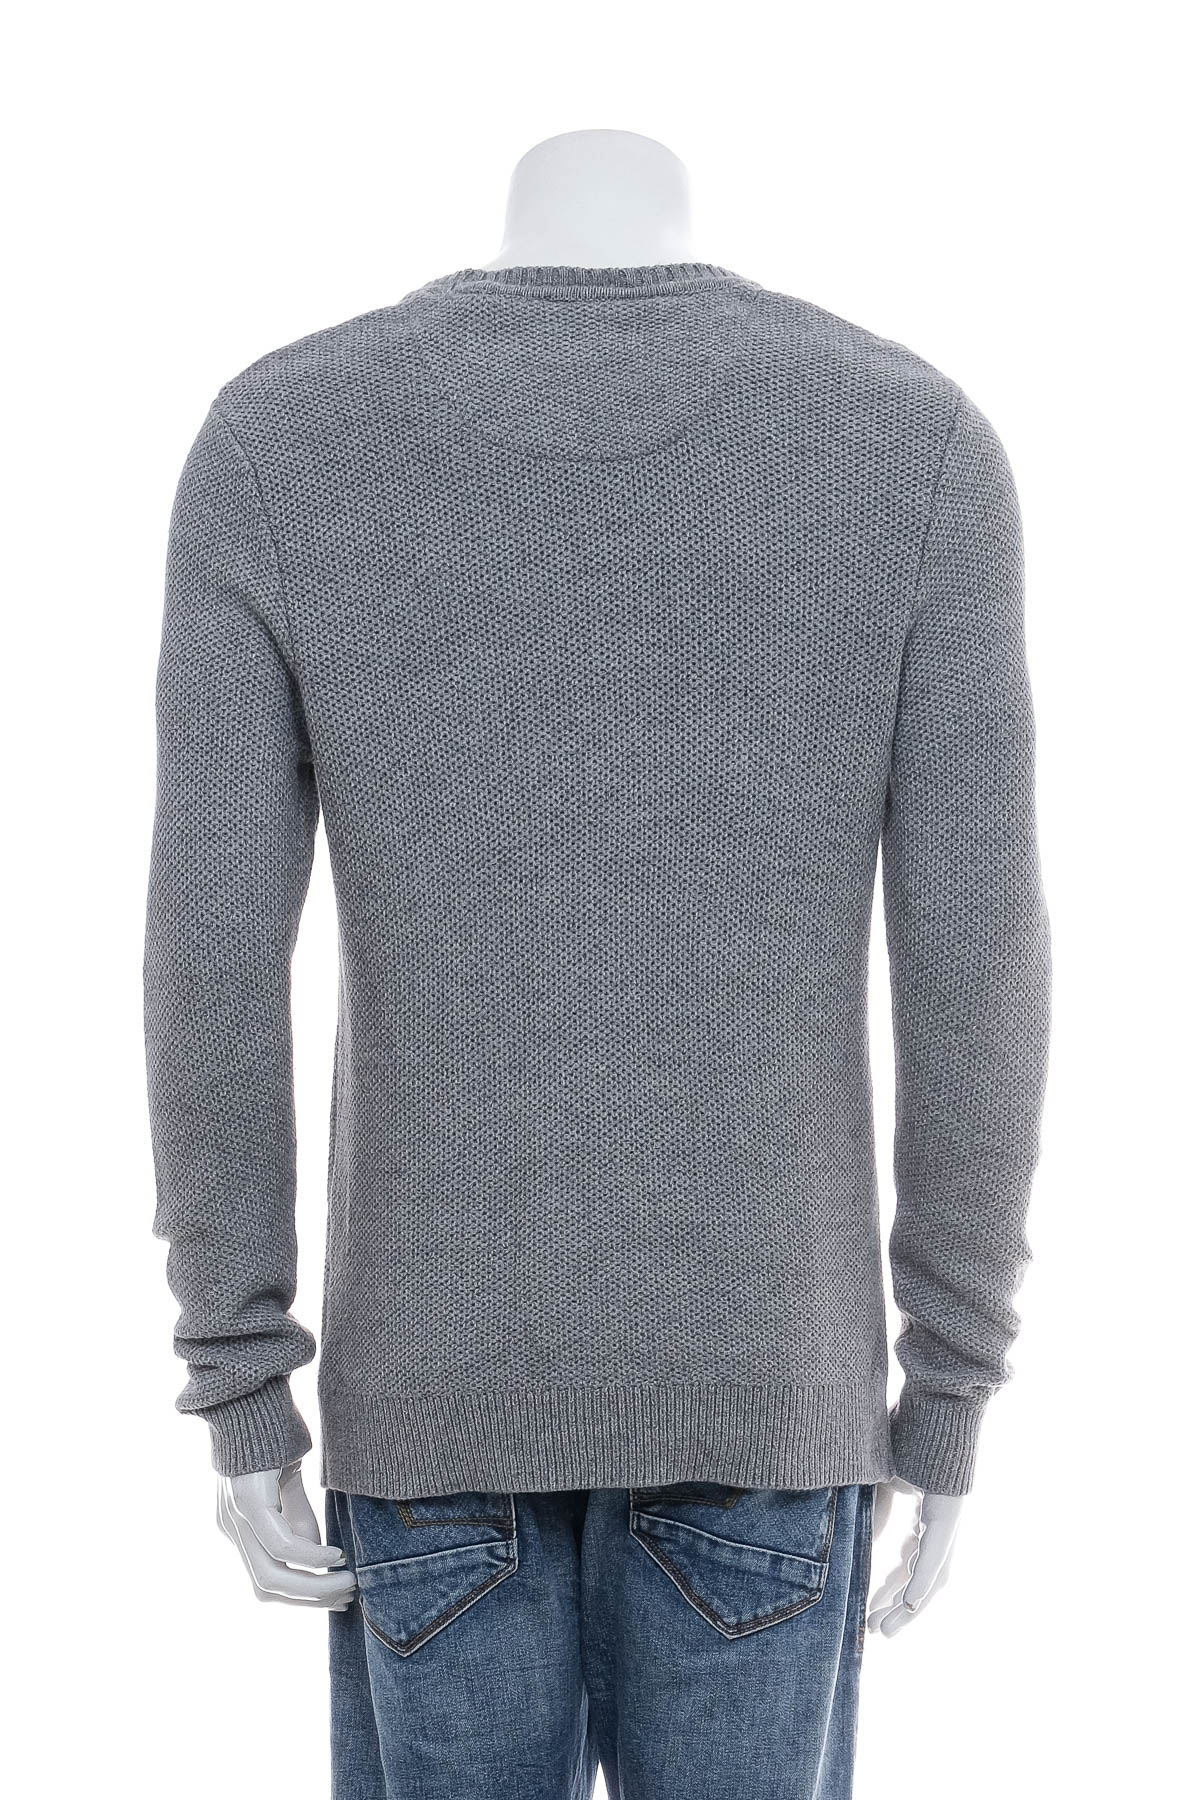 Men's sweater - Just Jeans - 1